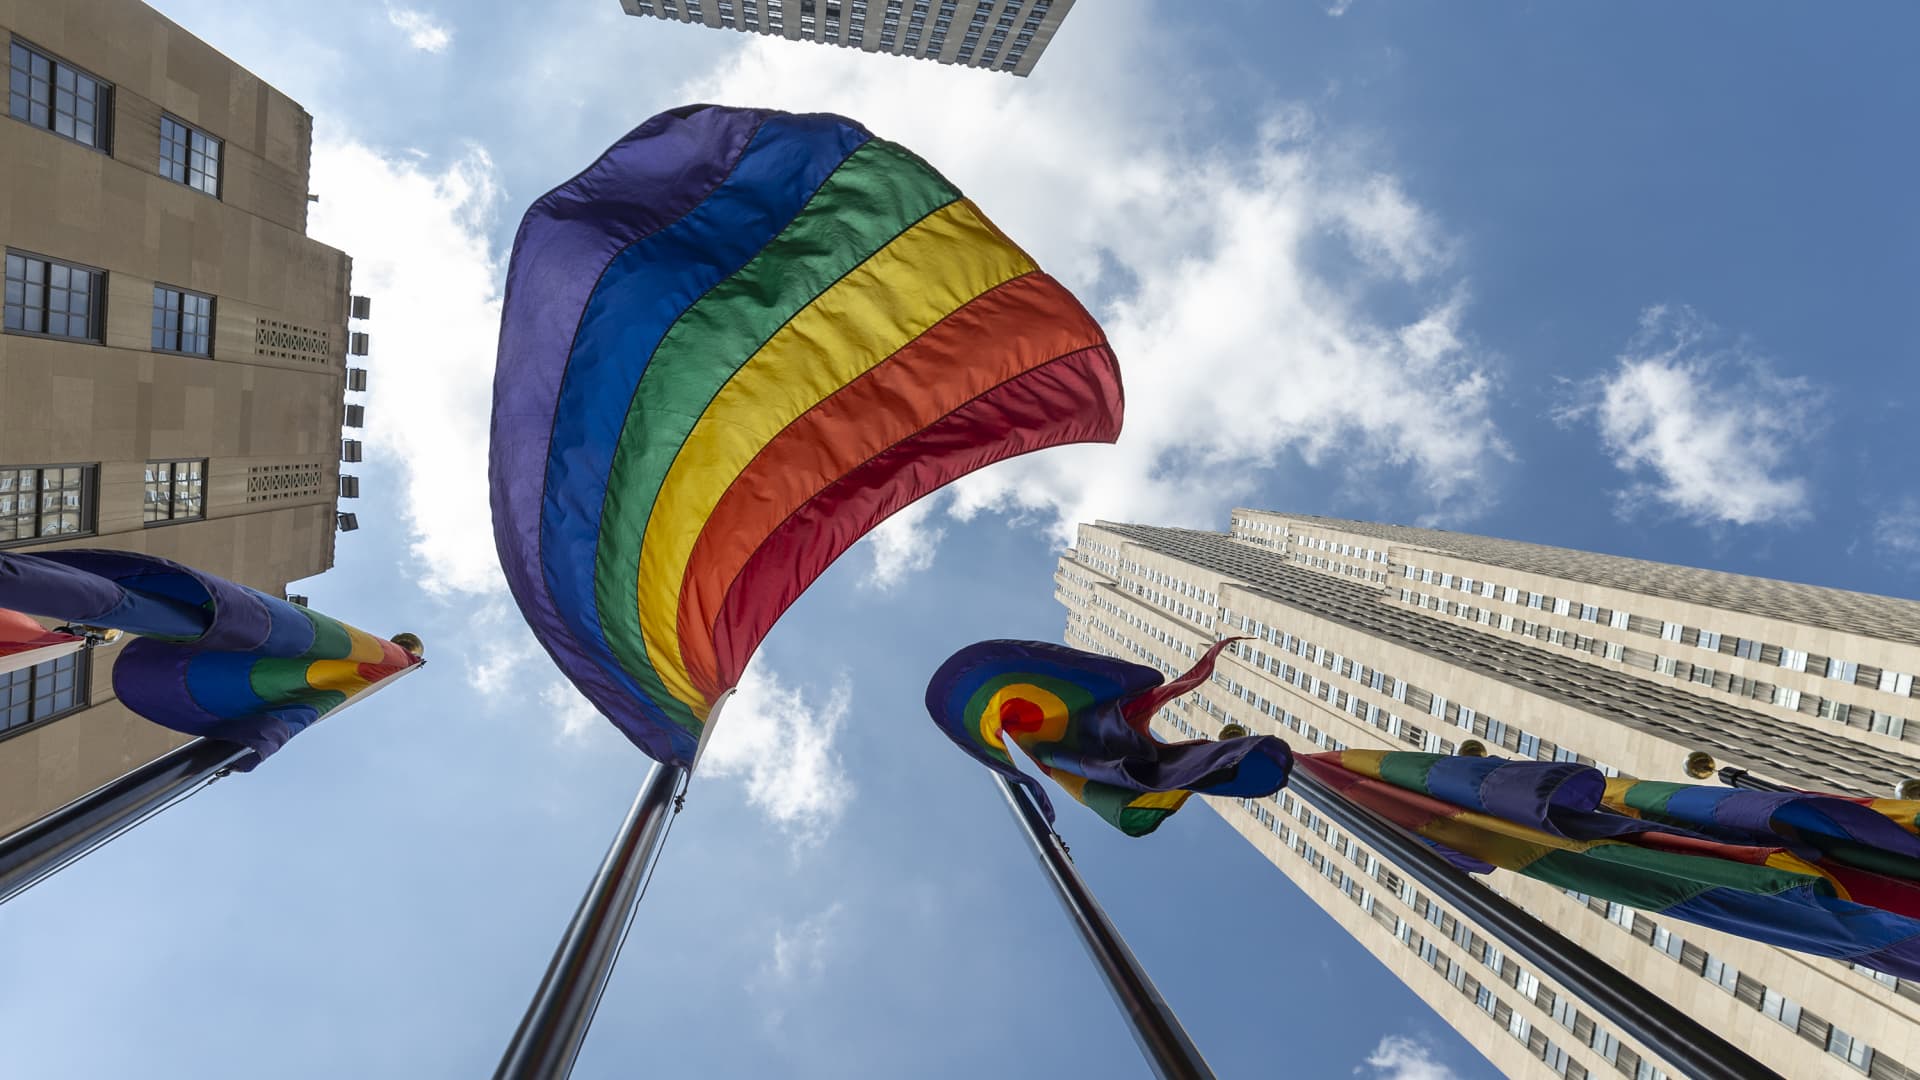 30% of LGBTQ+ adults have experienced discrimination or exclusion from financial services, study finds